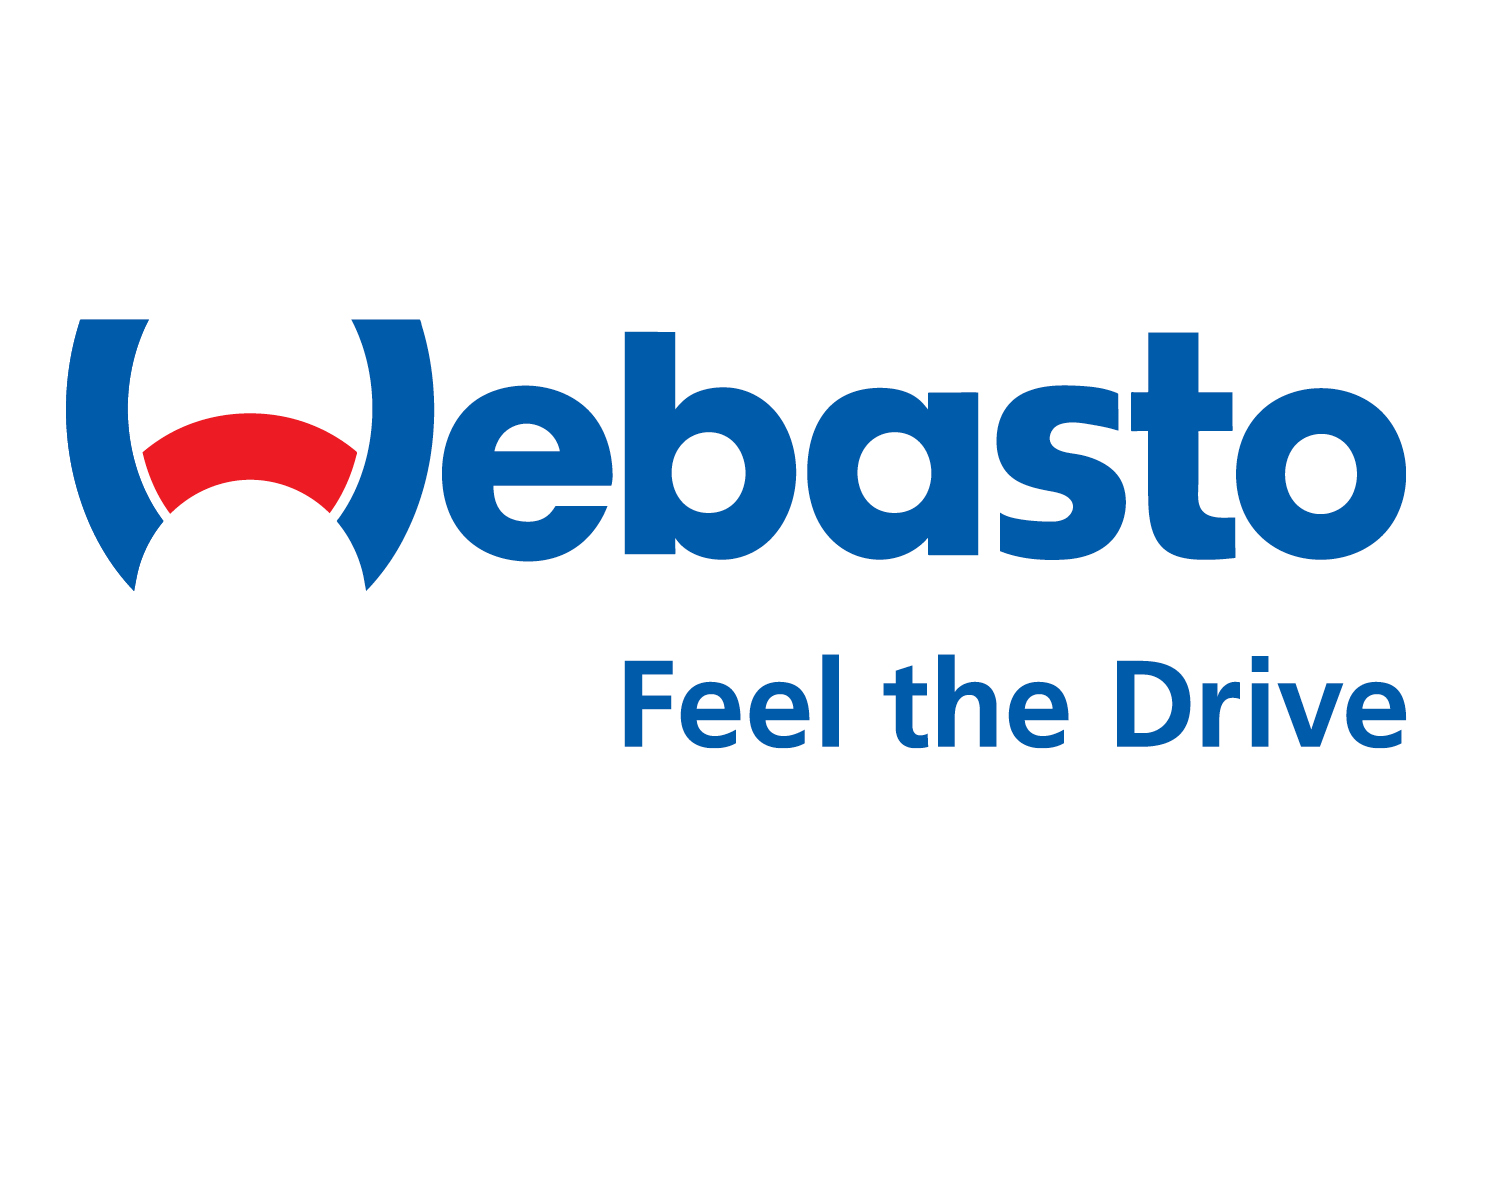 Webasto is one of the largest suppliers of heating, cooling and ventilation systems to the commercial vehicle industry.